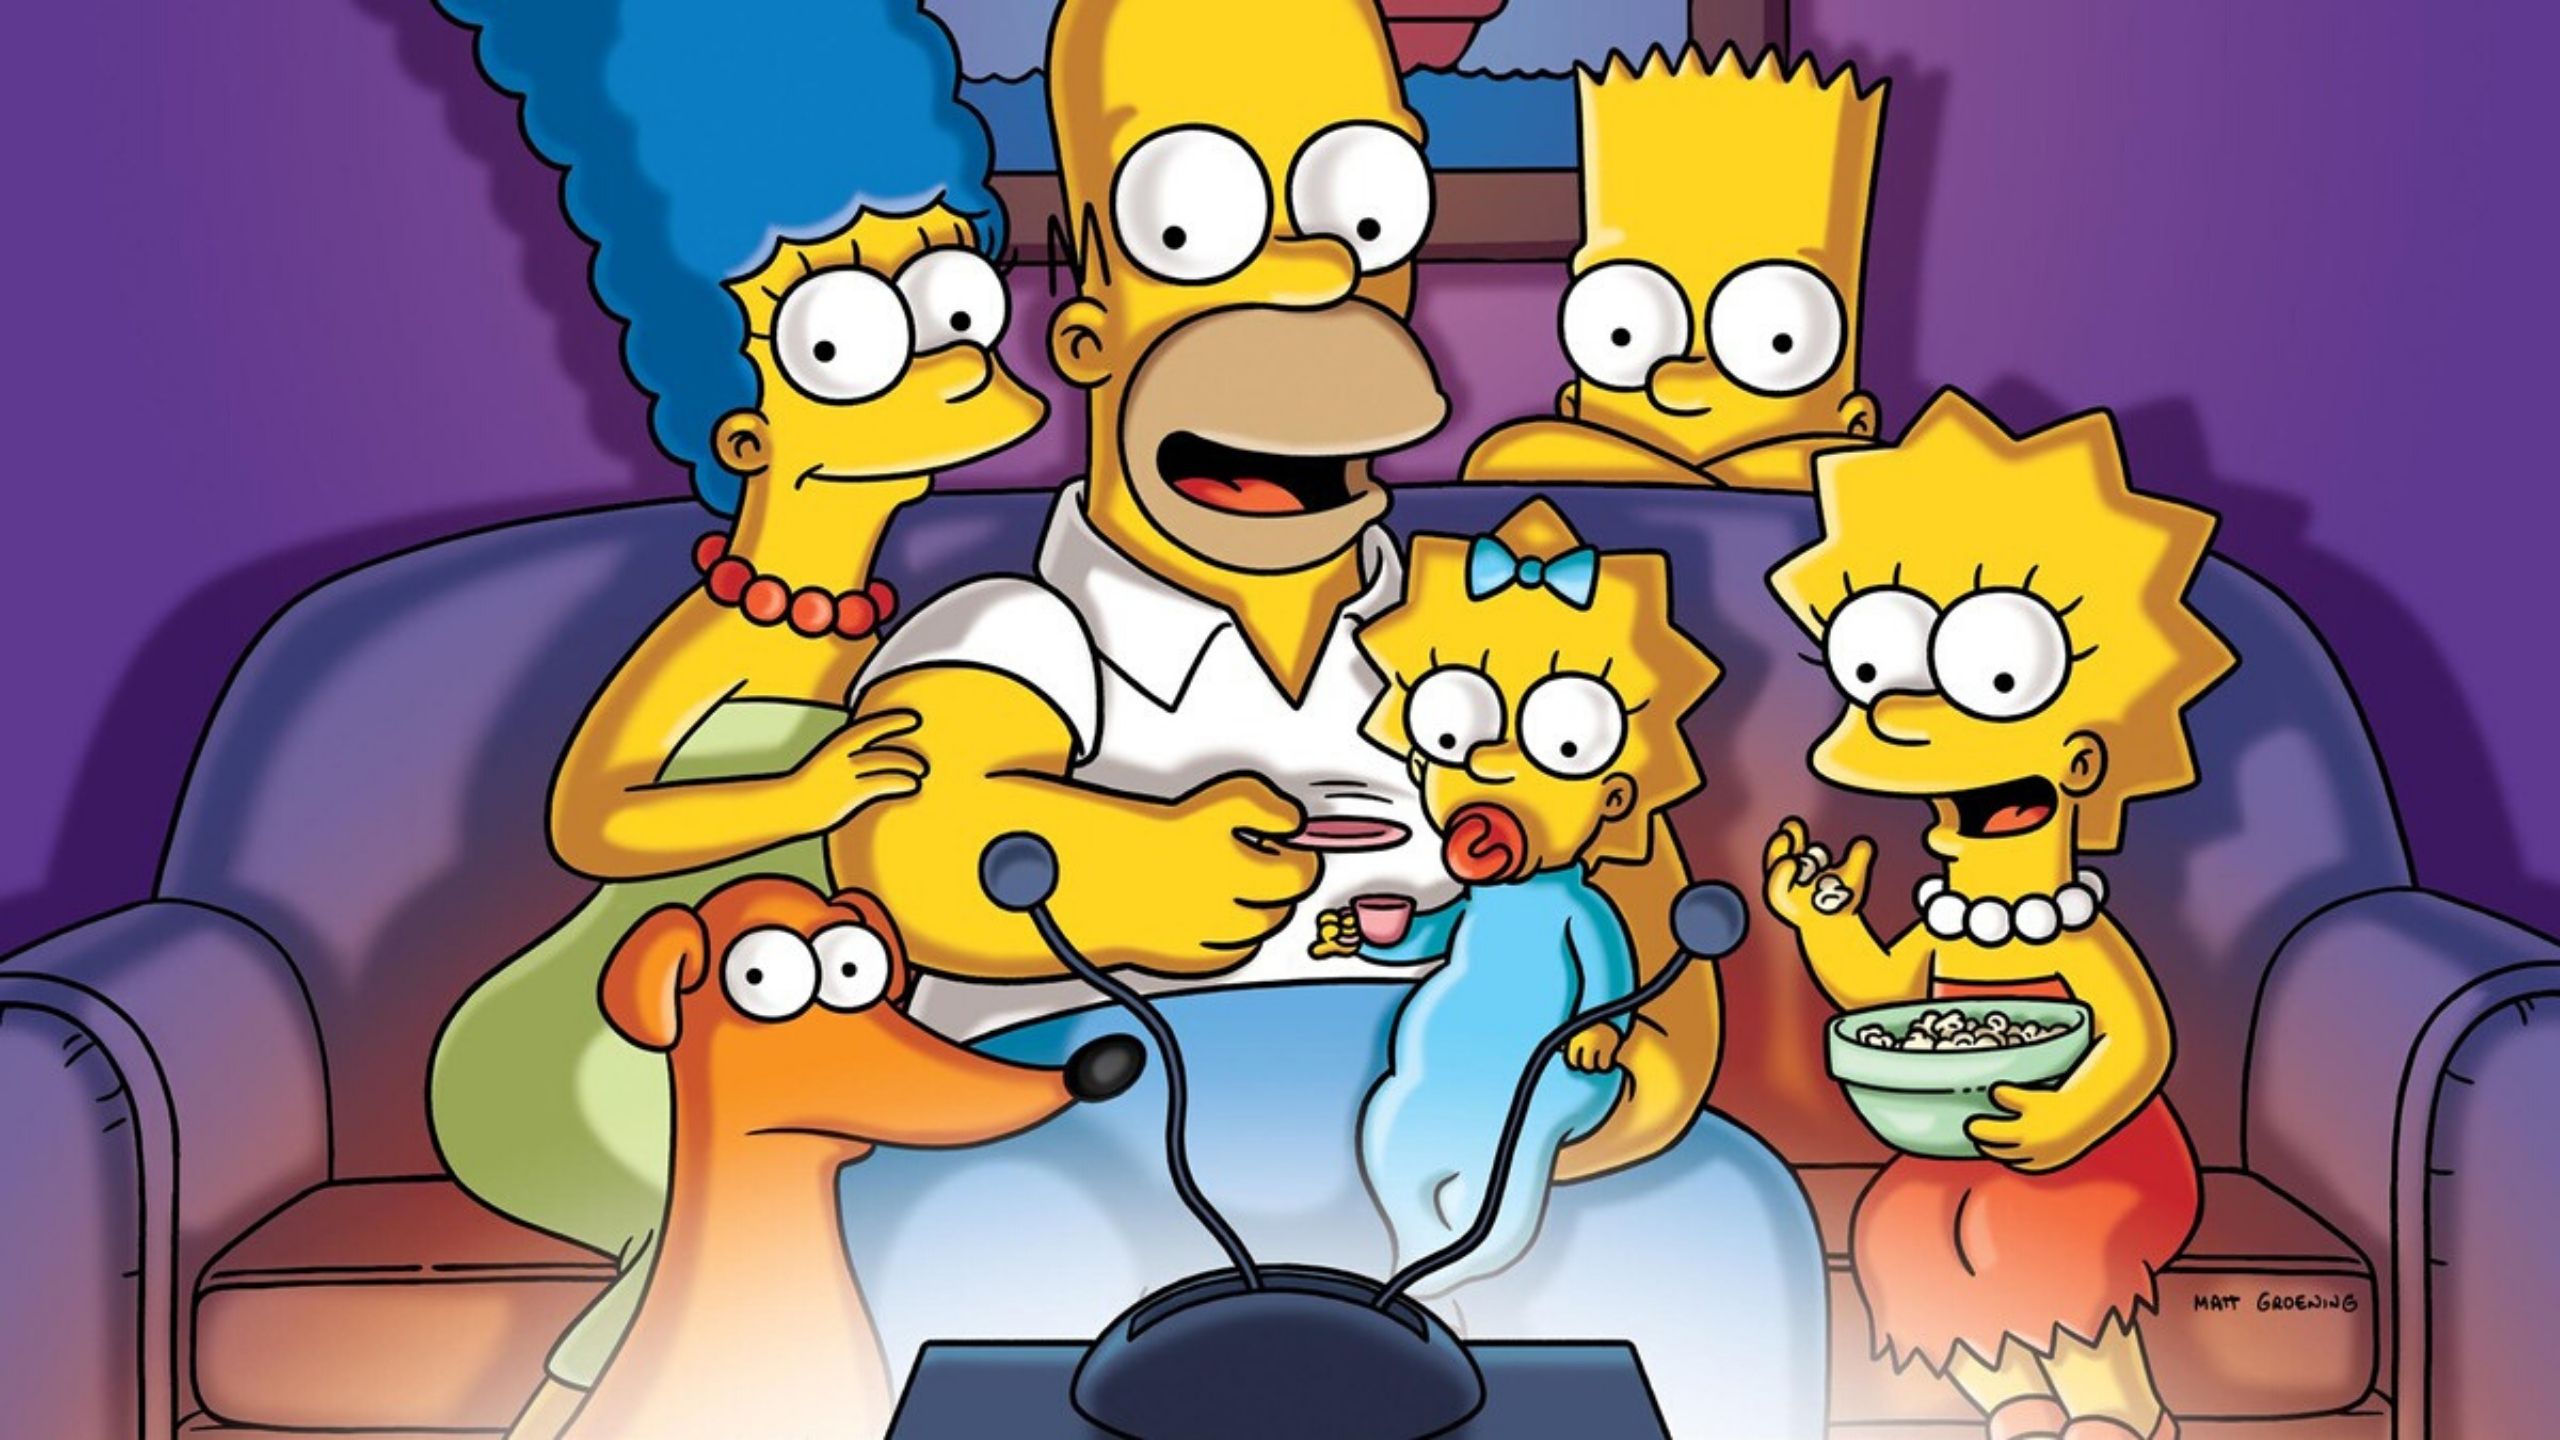 The Simpsons family pic